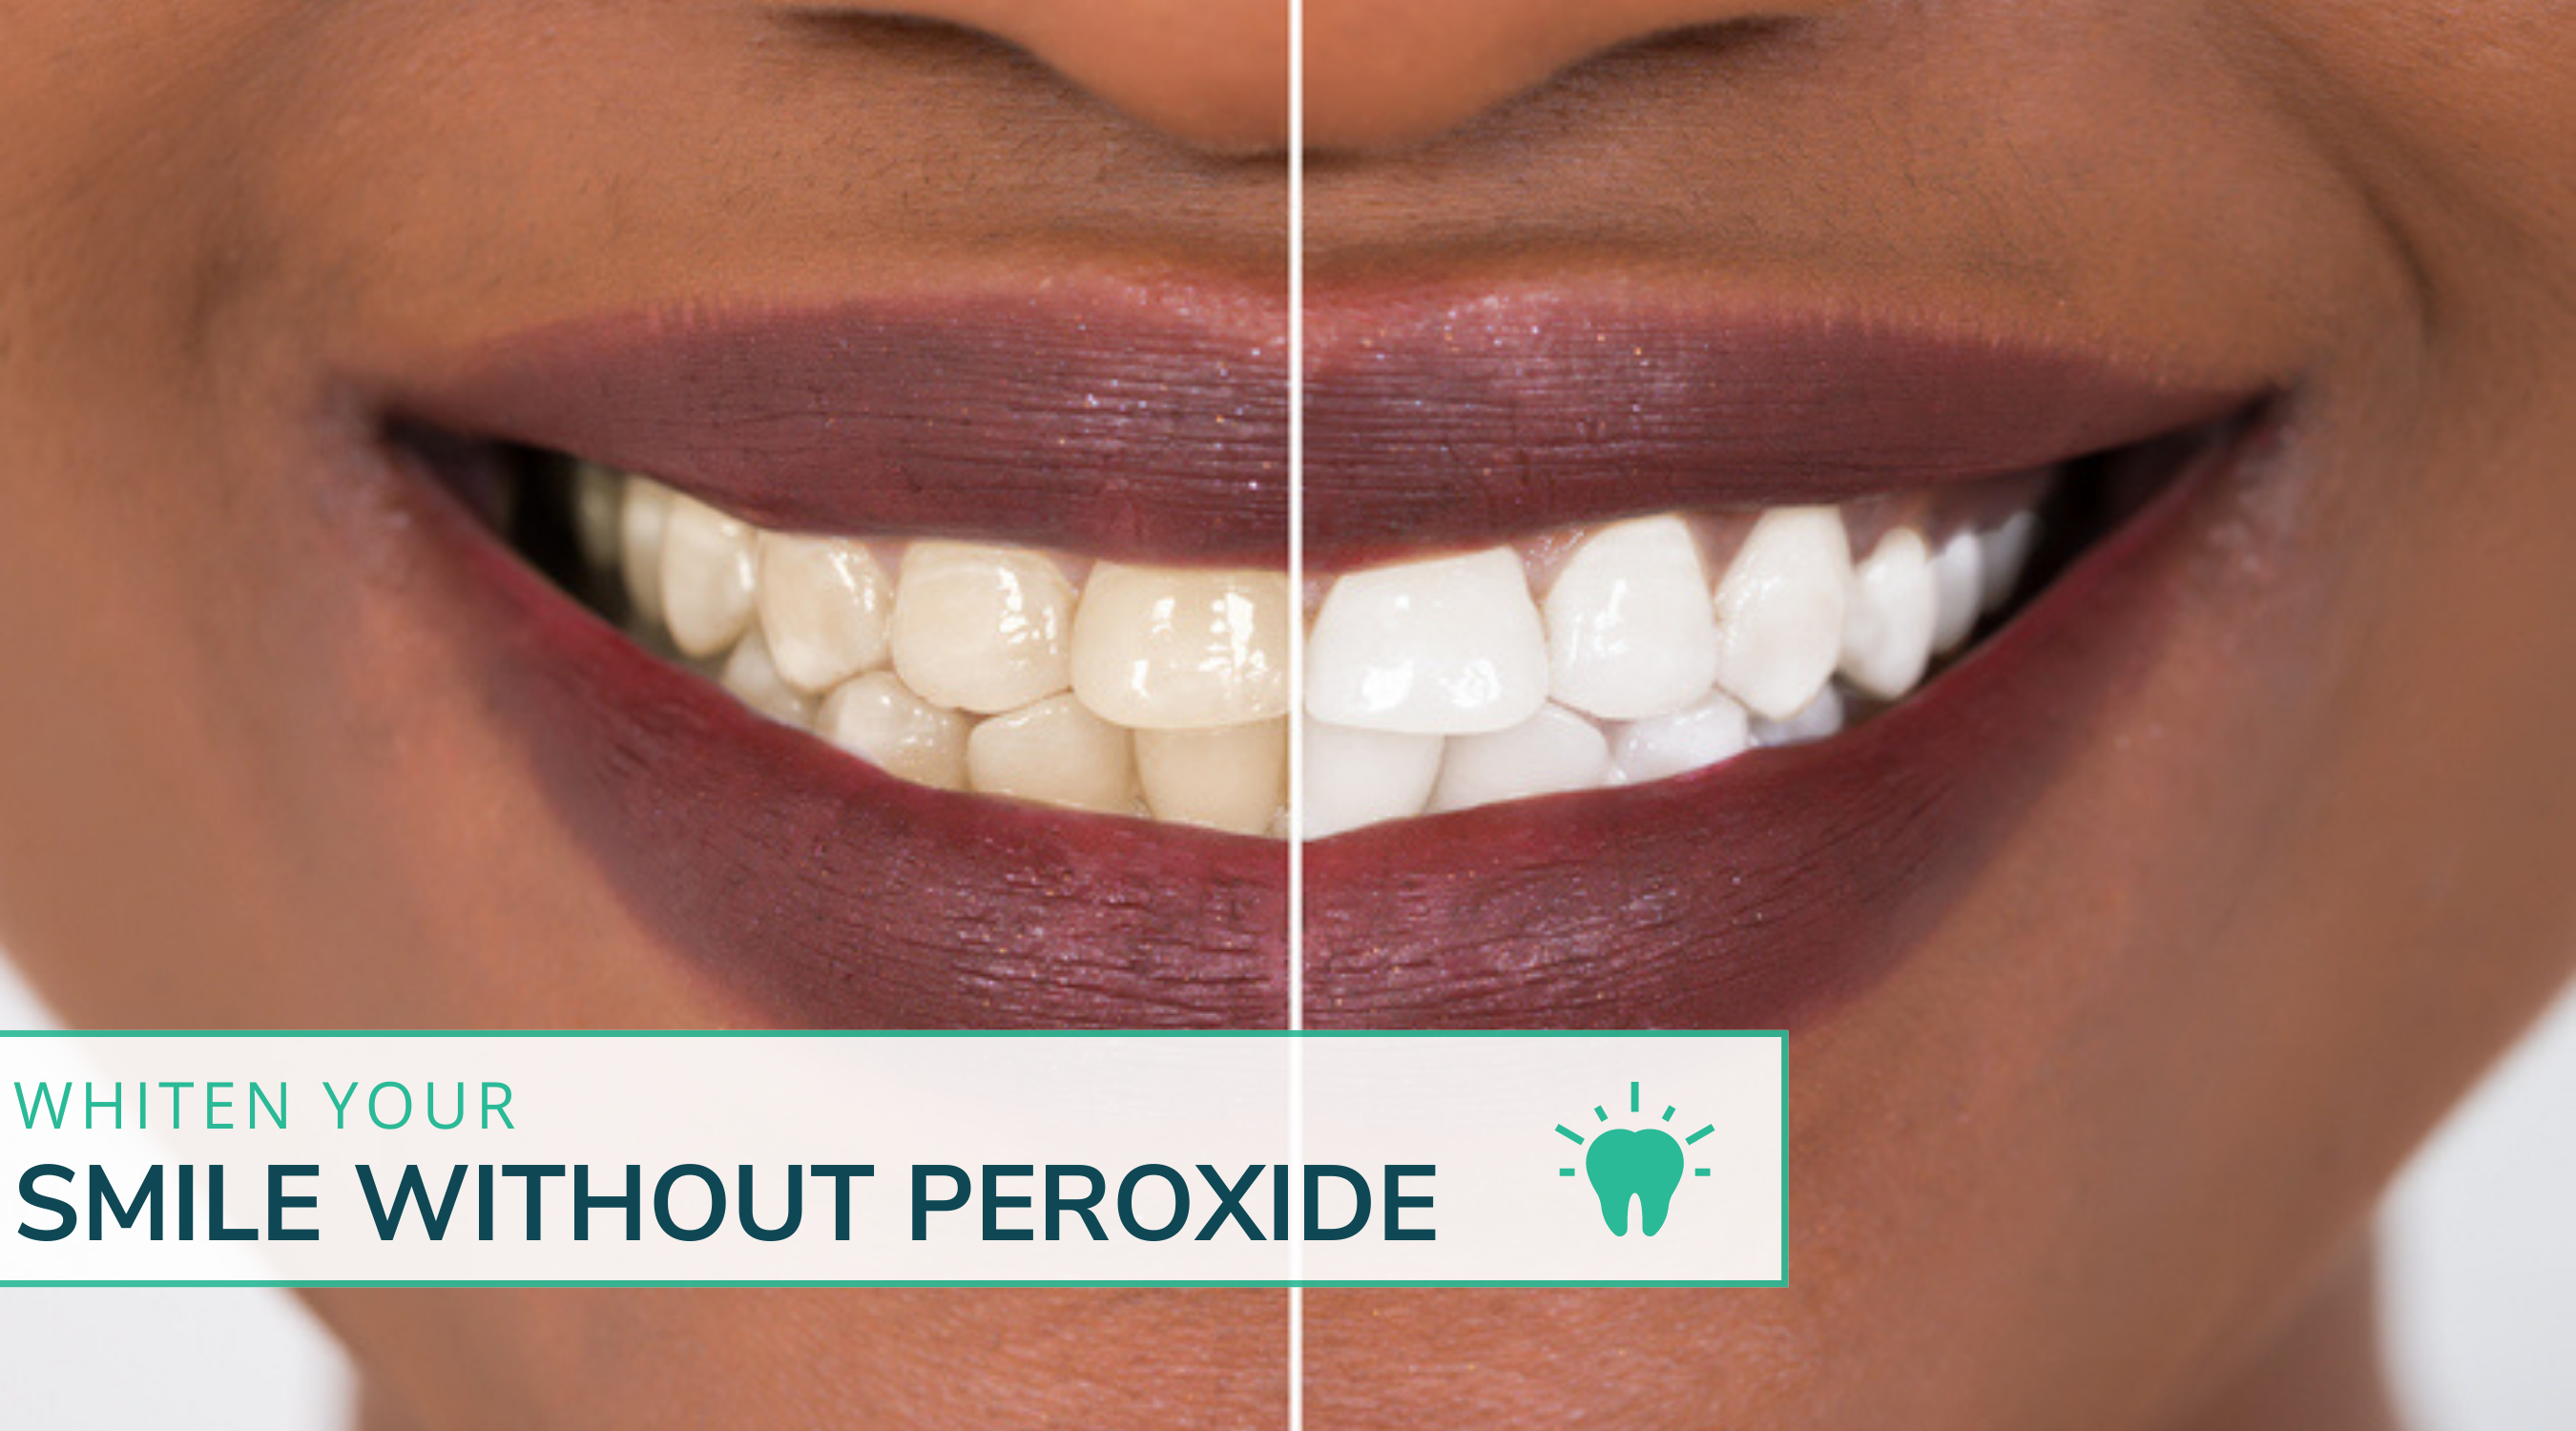 Whiten Your Smile Without Peroxide!